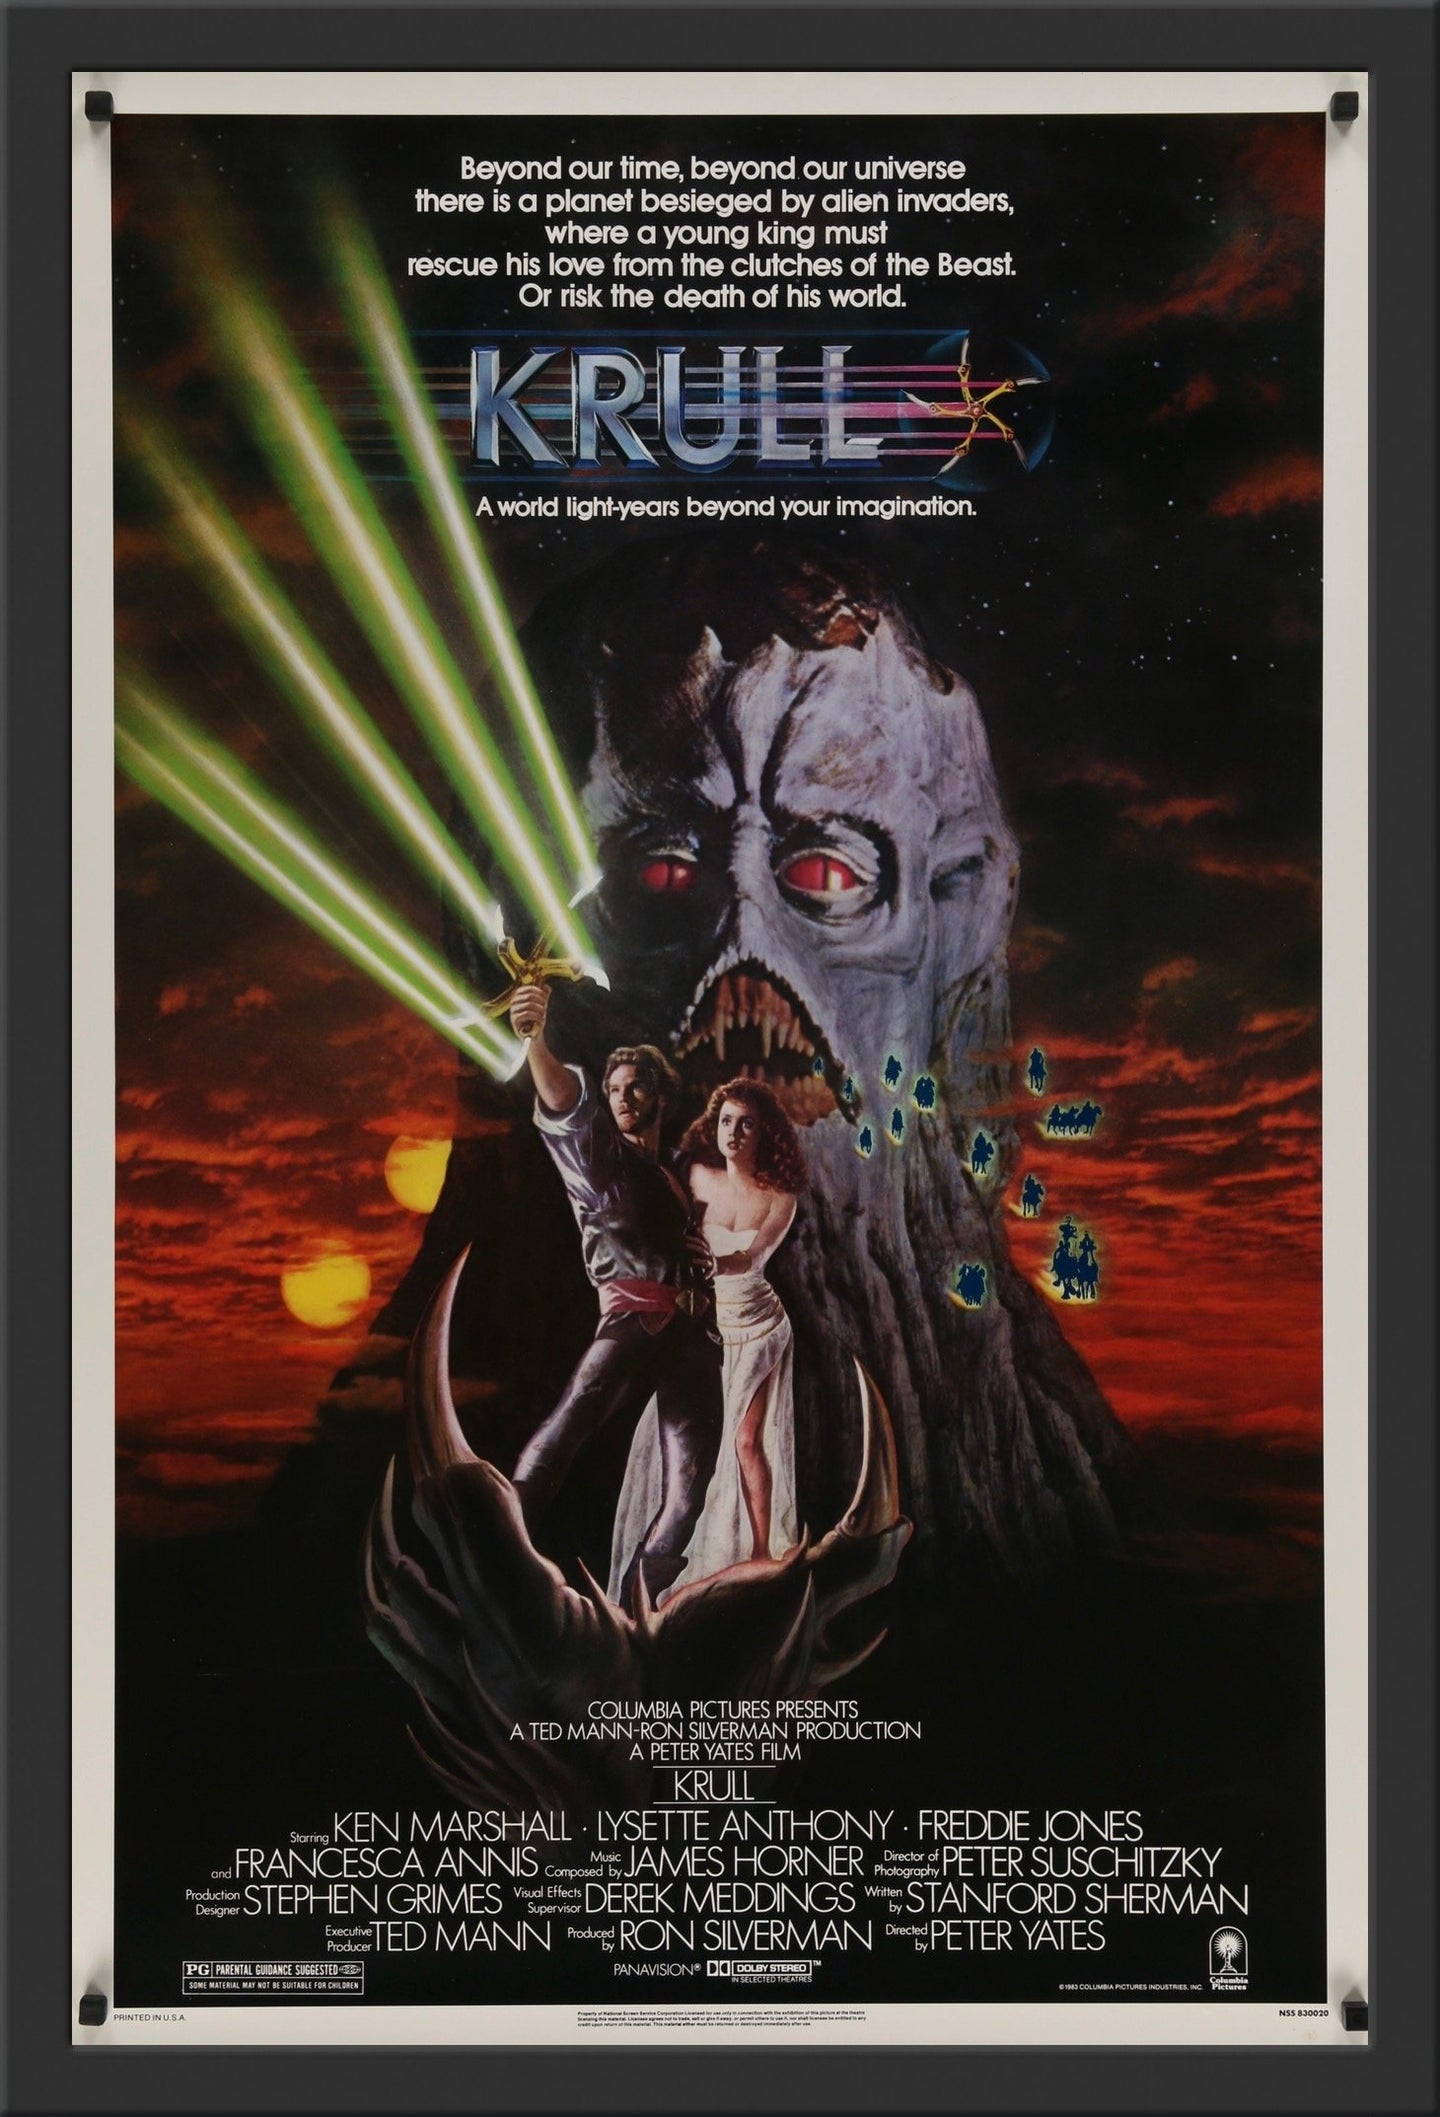 An original movie poster for the sci-fi film Krull